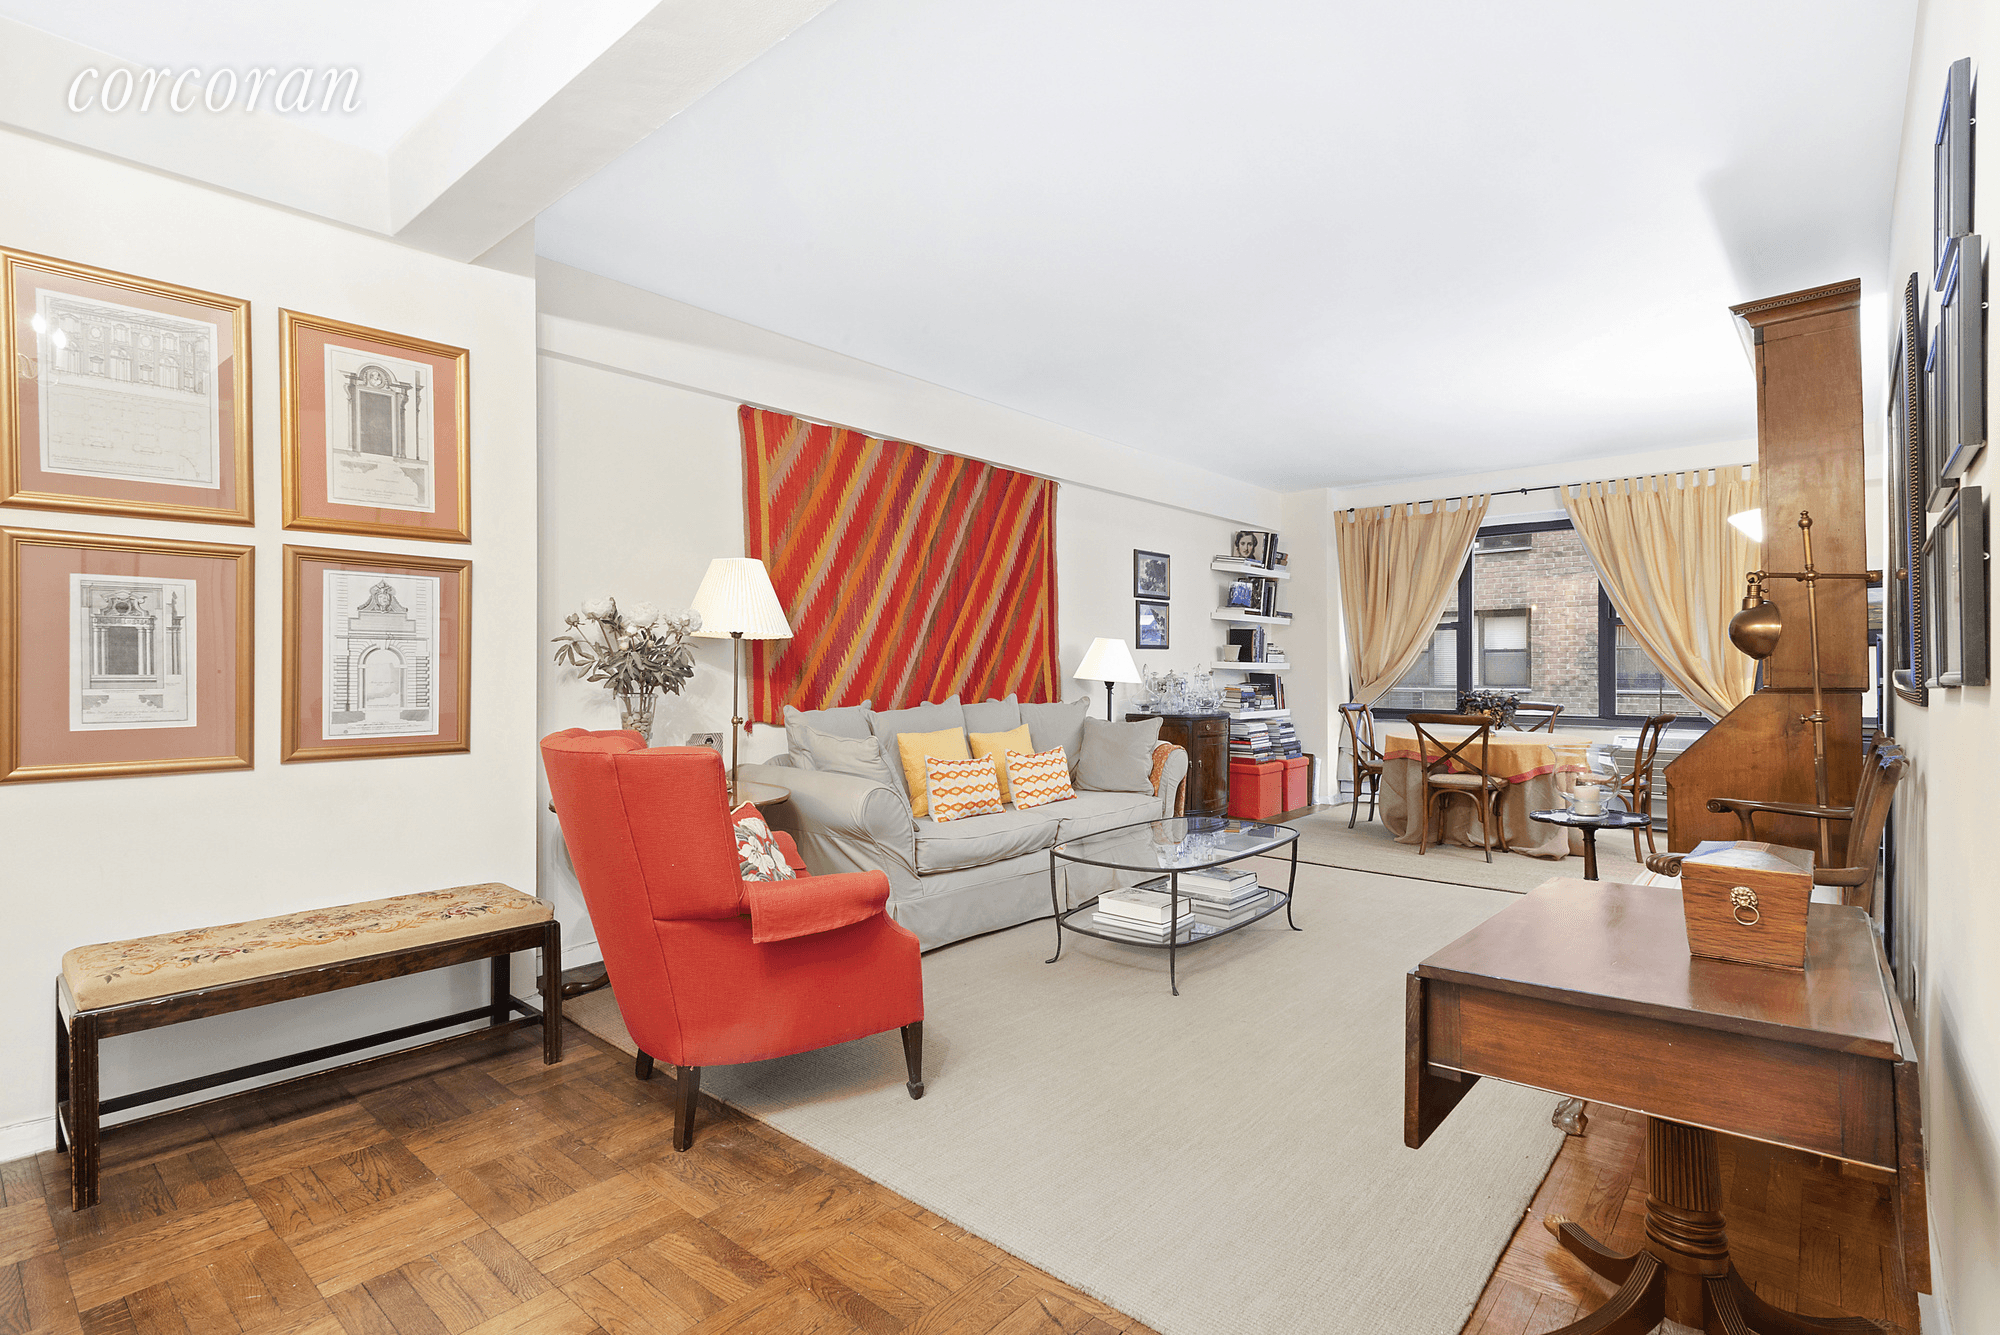 Located in the charming, peaceful community of Tudor City, this apartment offers the perfect haven away from the hustle and bustle of Manhattan.